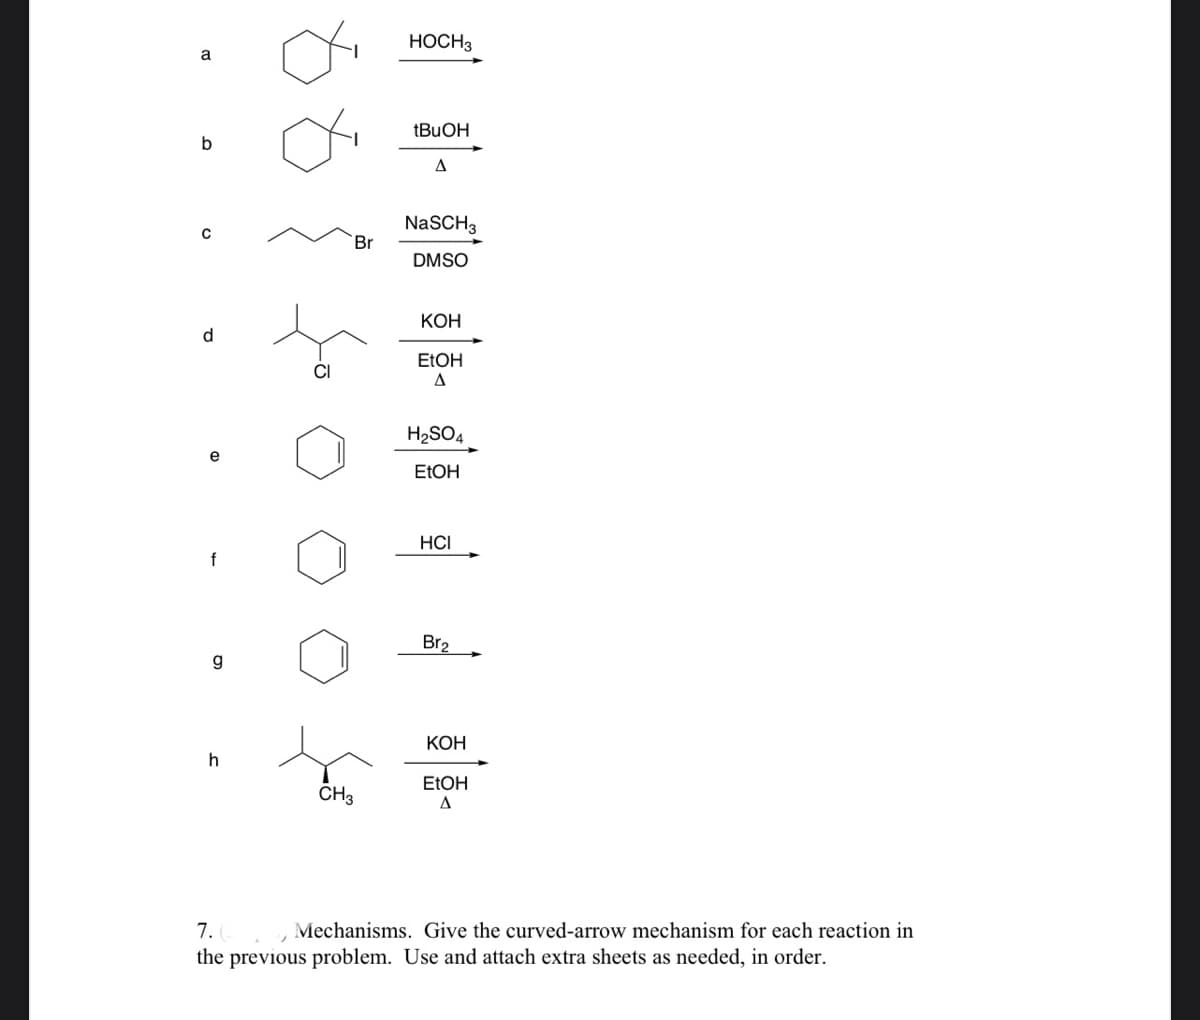 HOCH3
a
b
A
NaSCH3
`Br
DMSO
КОН
d
ELOH
CI
H2SO4
e
ELOH
HCI
f
Br2
g
КОН
ELOH
CH3
7.
the previous problem. Use and attach extra sheets as needed, in order.
Mechanisms. Give the curved-arrow mechanism for each reaction in
